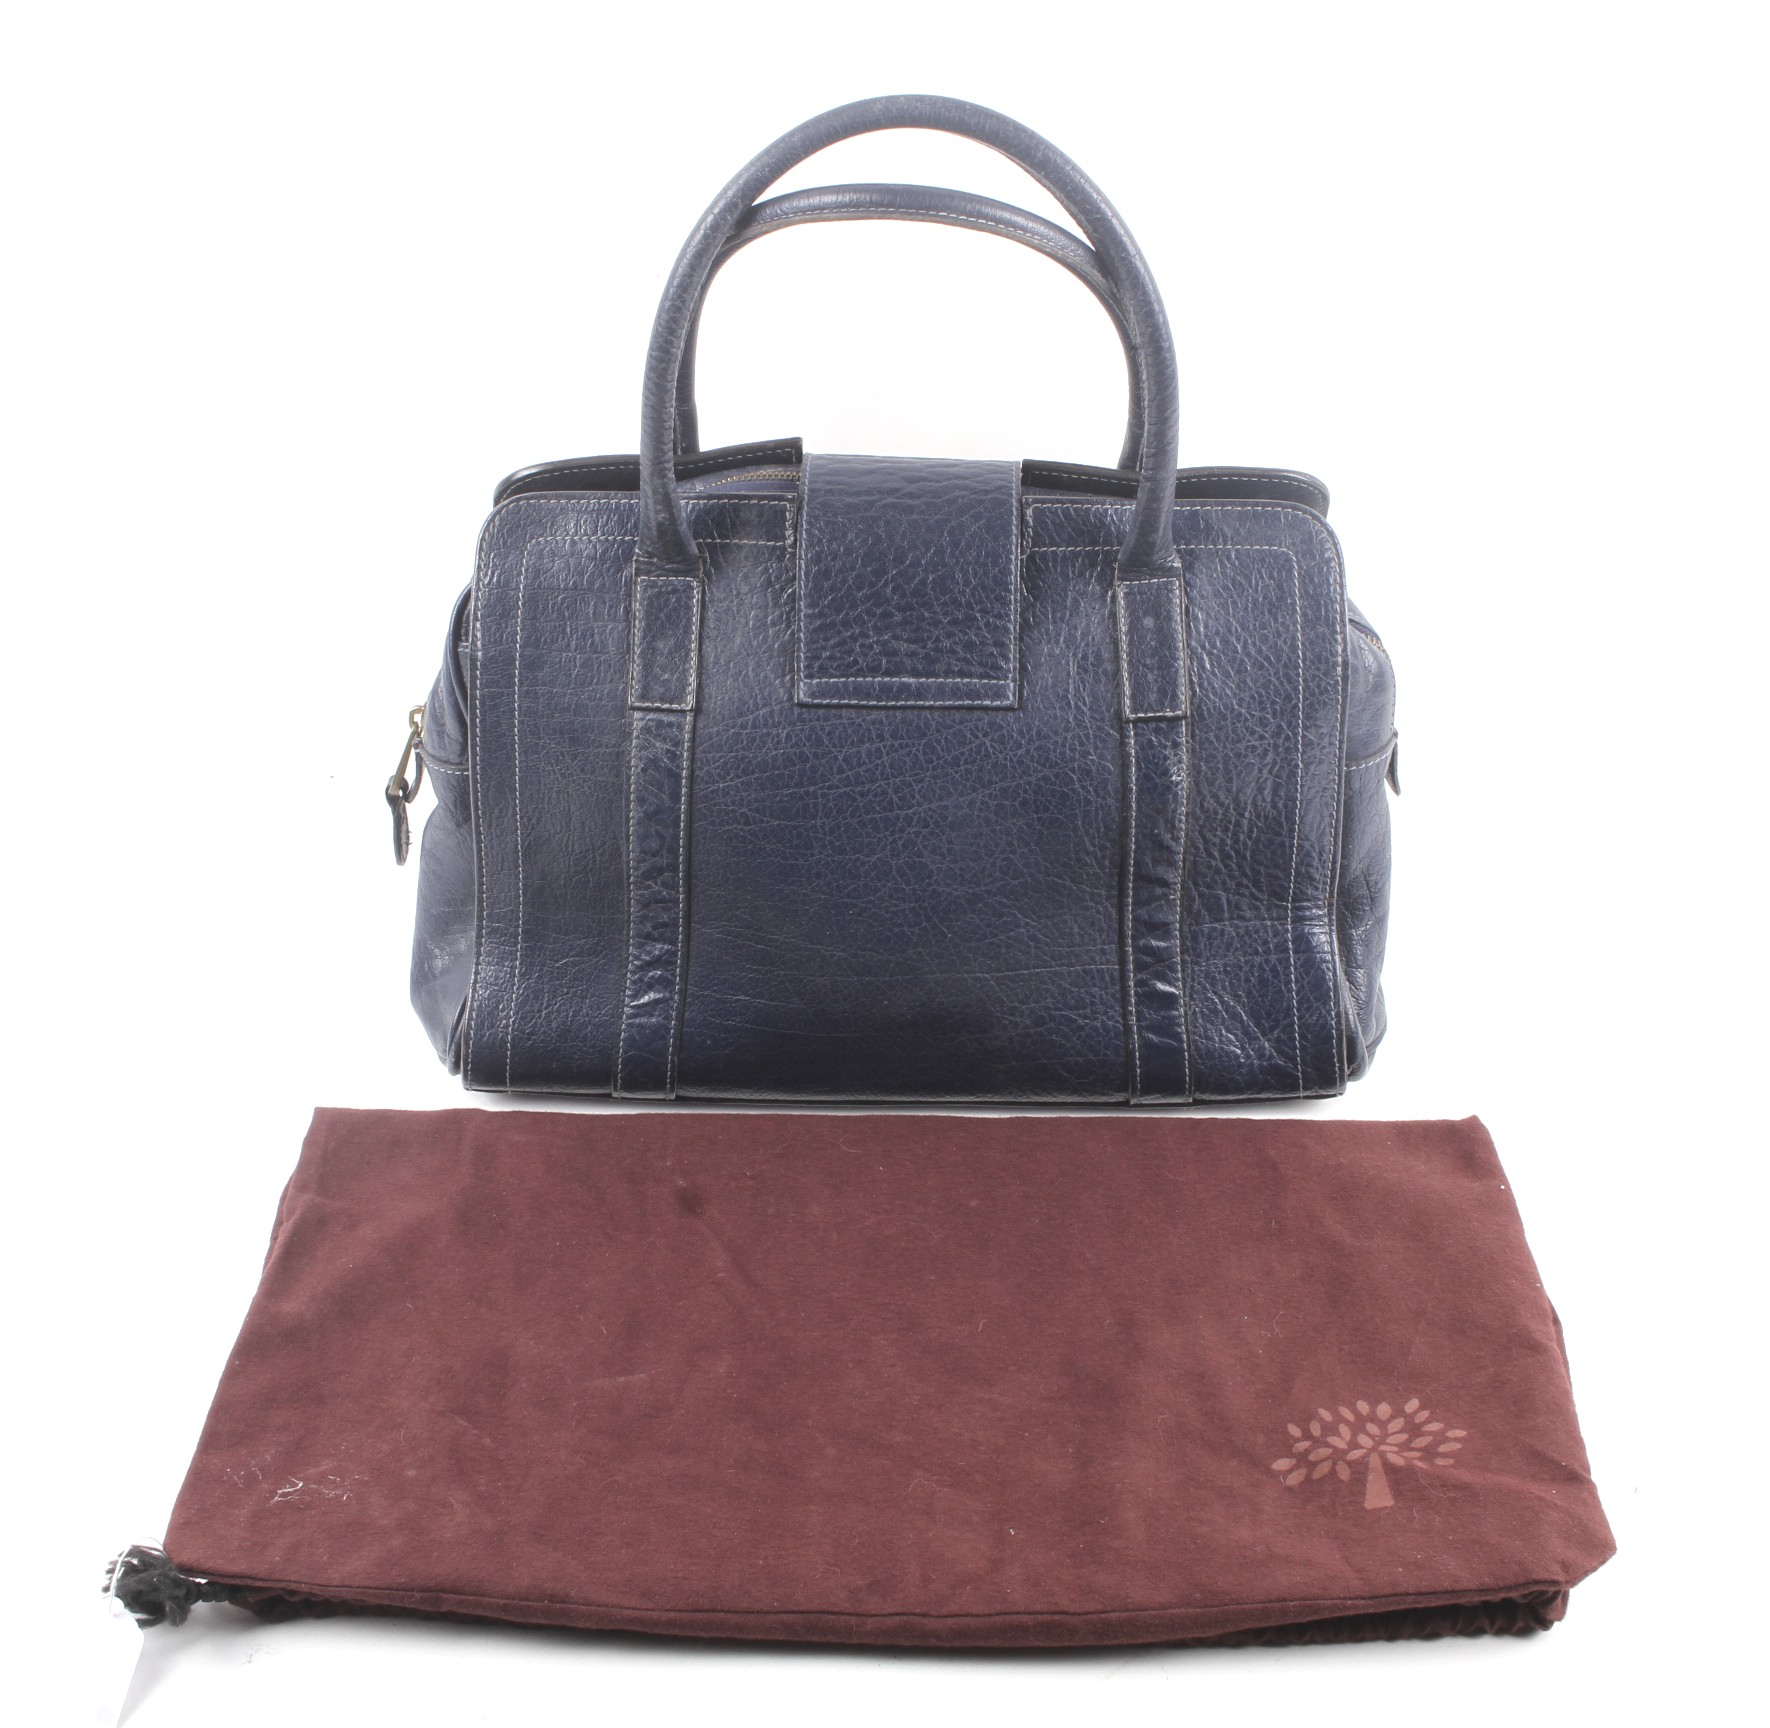 A Mulberry 'Bayswater' grained blue leather handbag. - Image 2 of 2